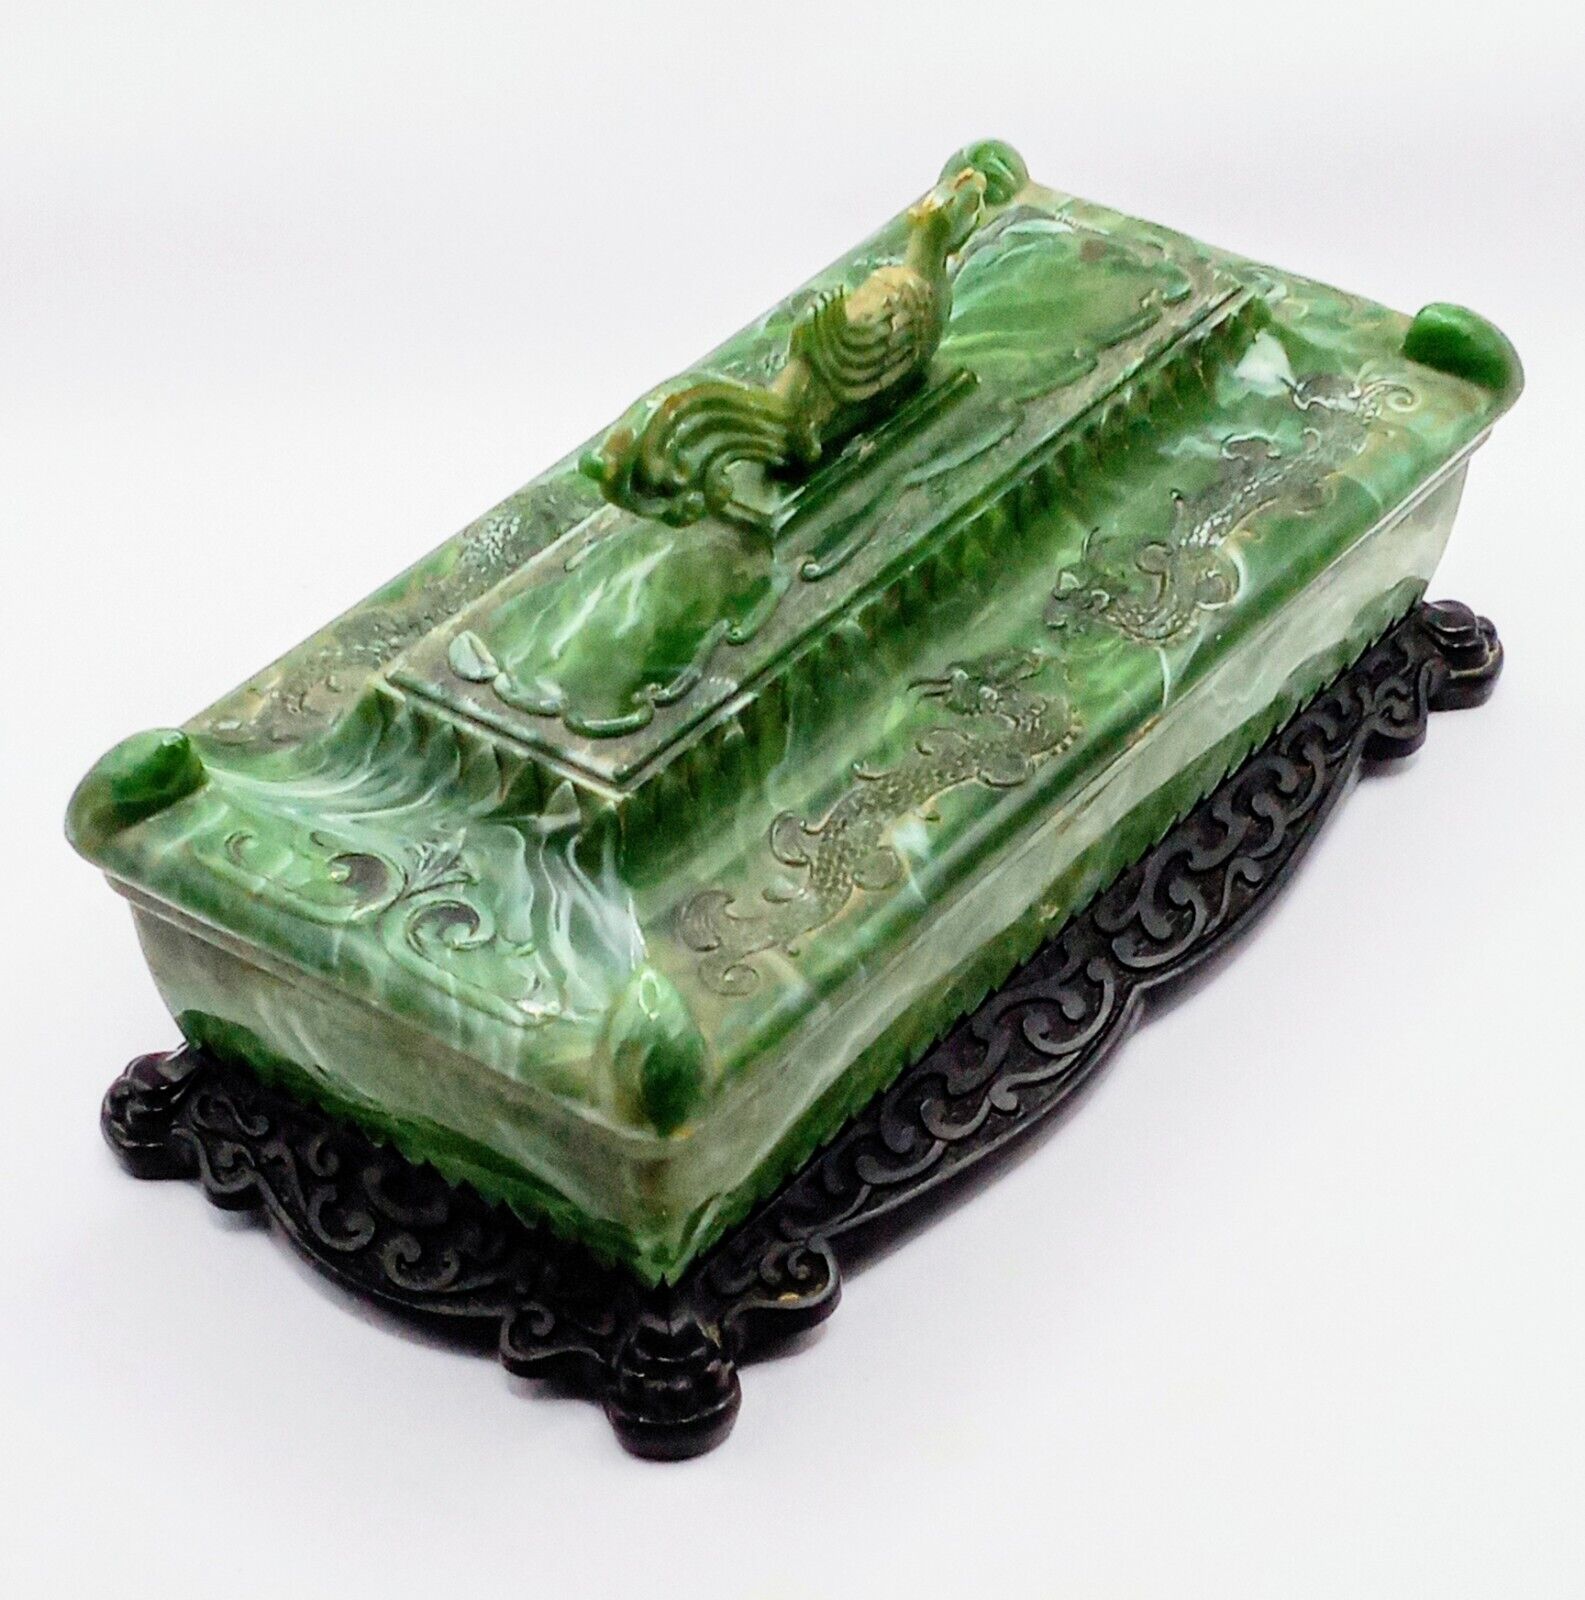 Vintage Green Plastic Marble Jewelry Weed Stash Casket Box With Dragons